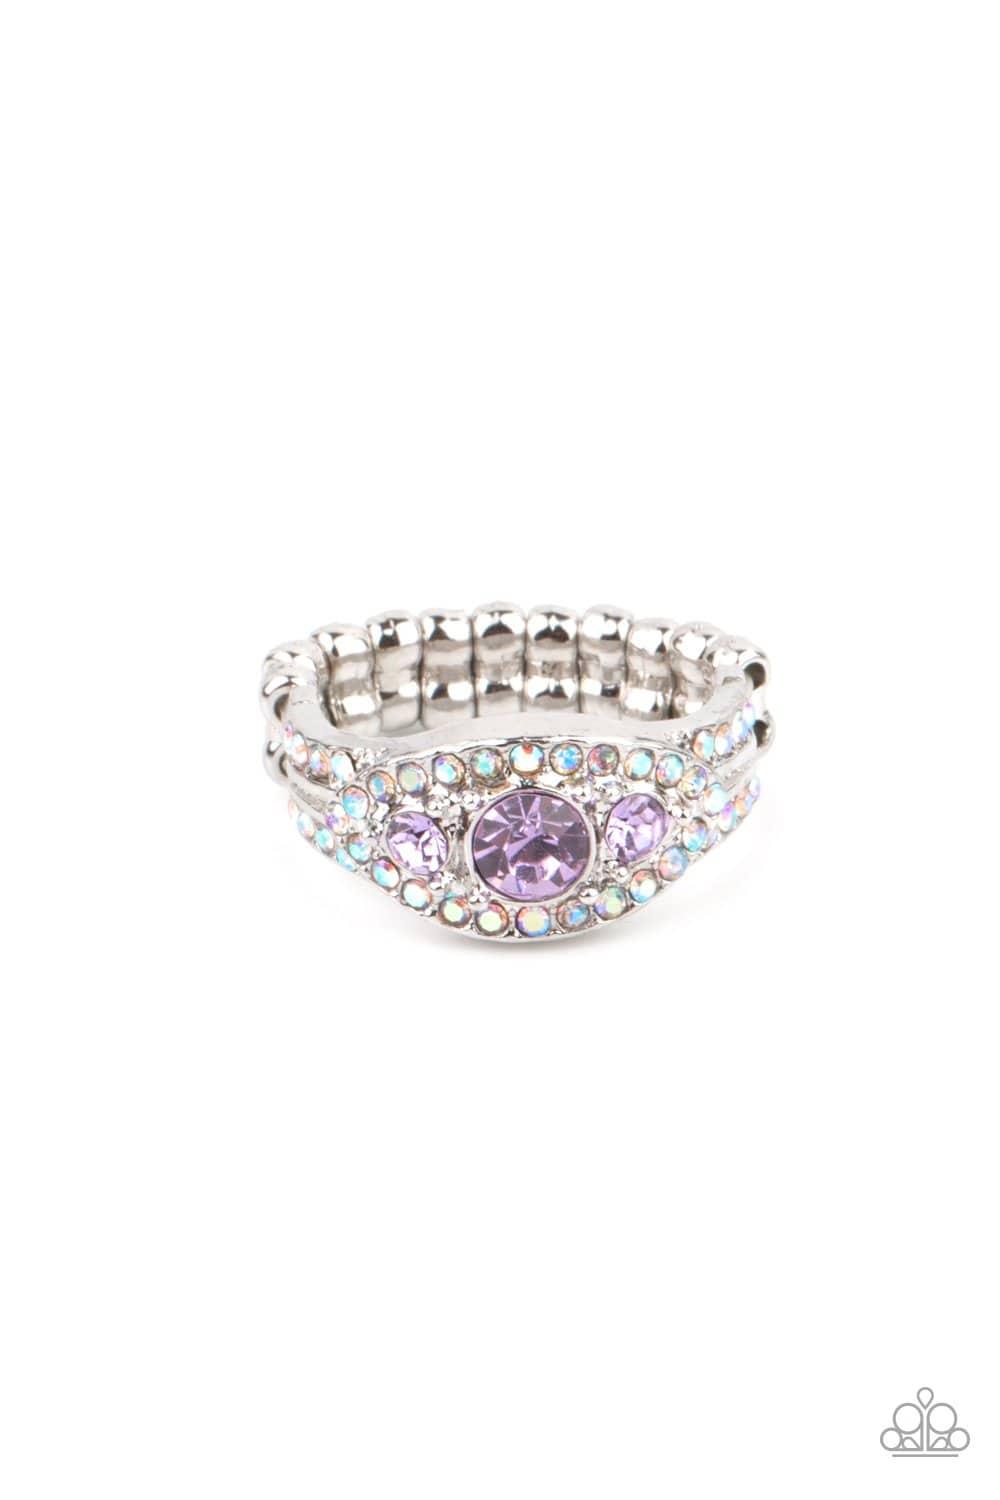 Paparazzi Accessories Celestial Crowns - Purple A trio of brilliant Amethyst Orchid rhinestones are set inside a glittering rhinestone encrusted frame creating a divinely heavenly essence atop the finger. Features a dainty stretchy band for a flexible fit